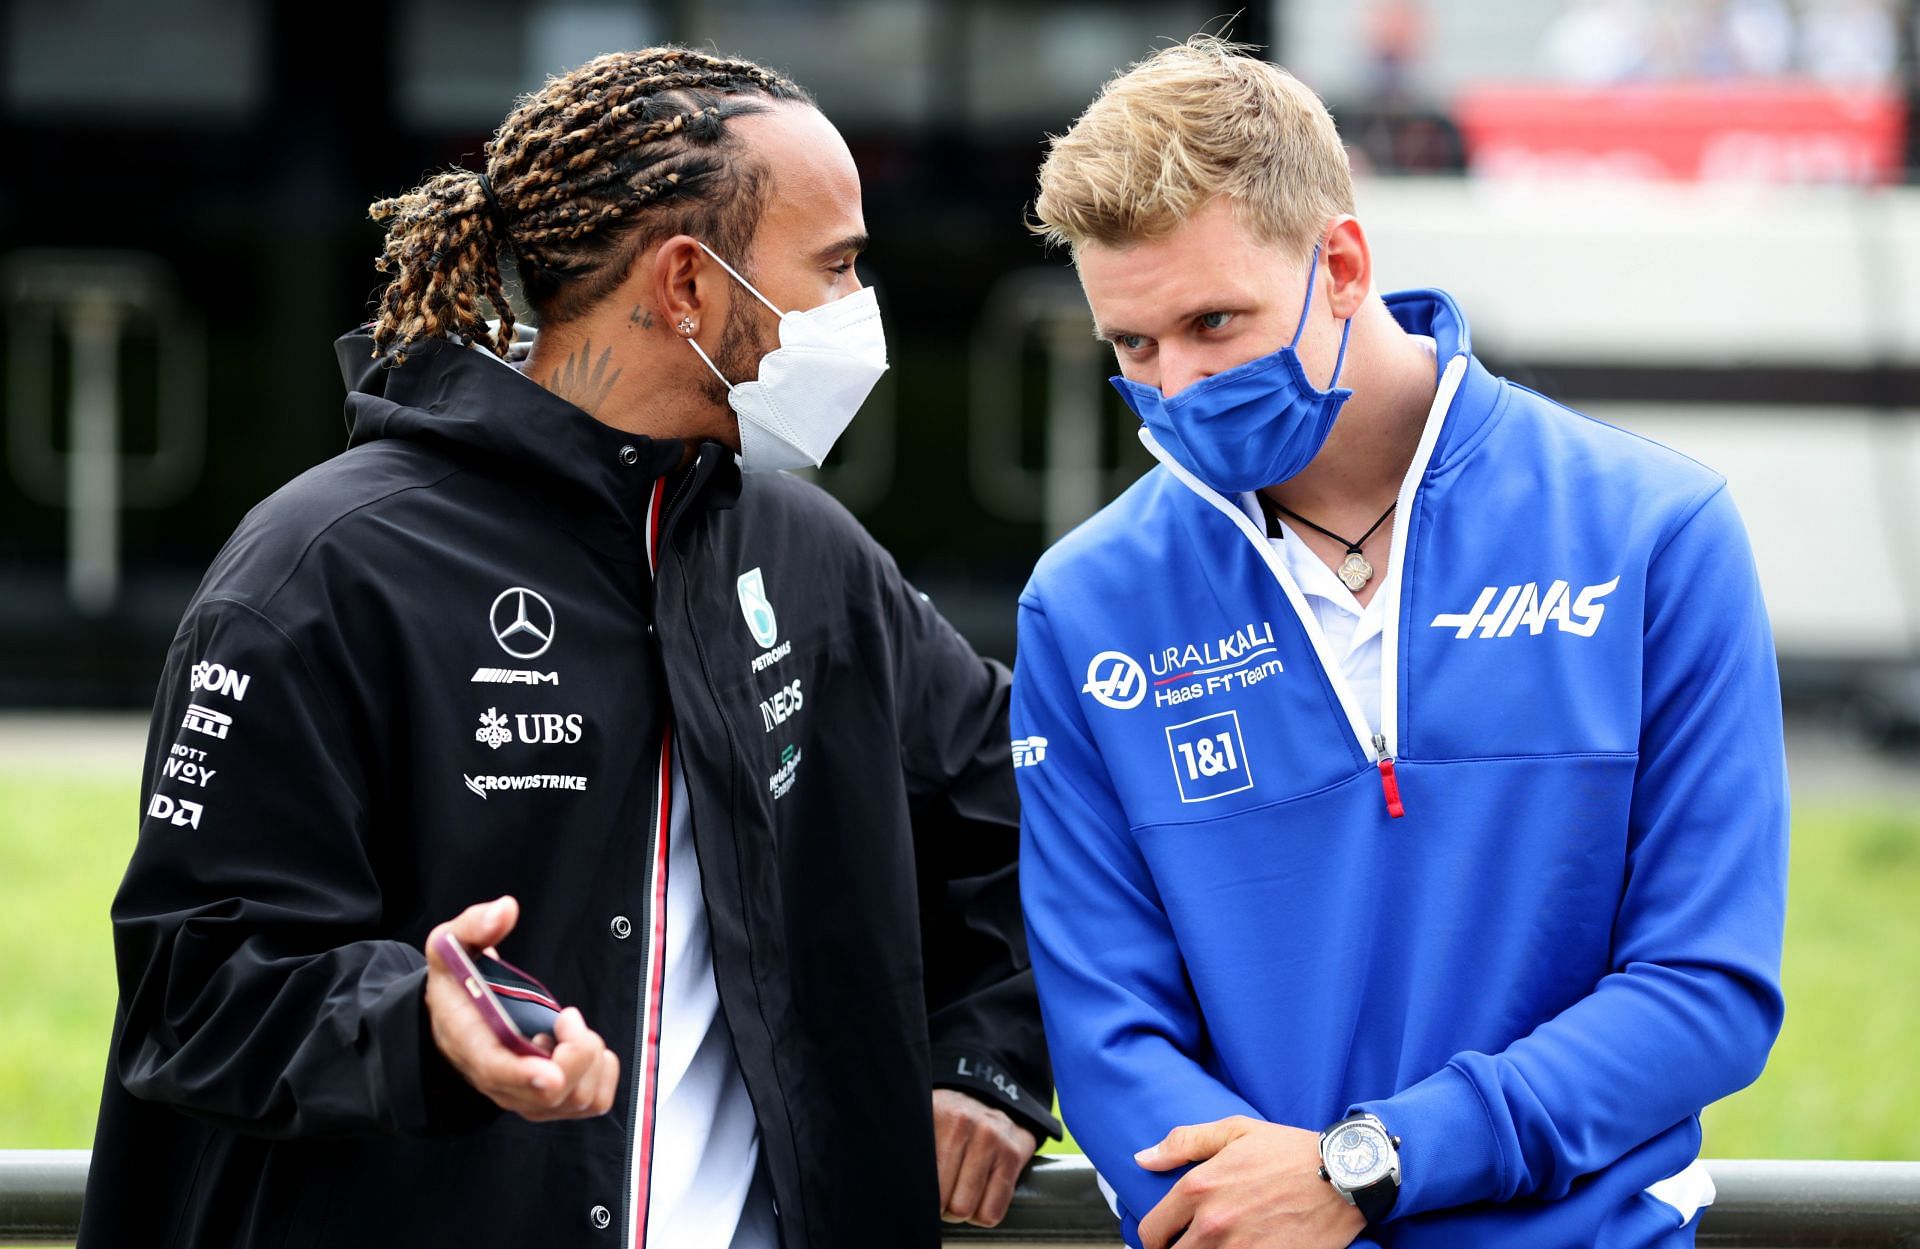 Lewis Hamilton (left) in conversation with Mick Schumacher (right) (Photo by Peter Fox/Getty Images)